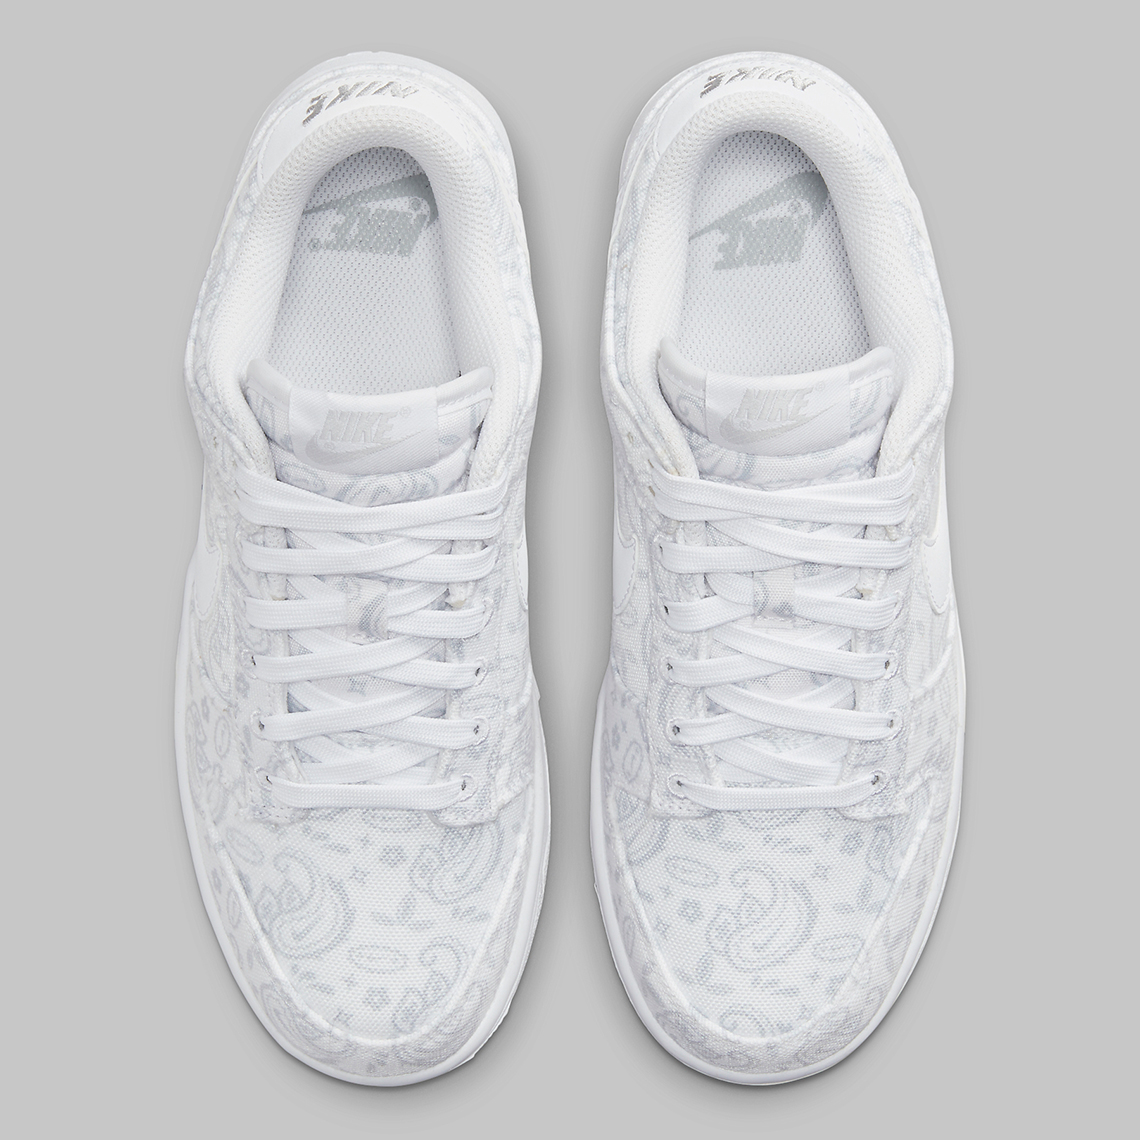 nike dunk low paisley white grey dj9955 100 release date 8